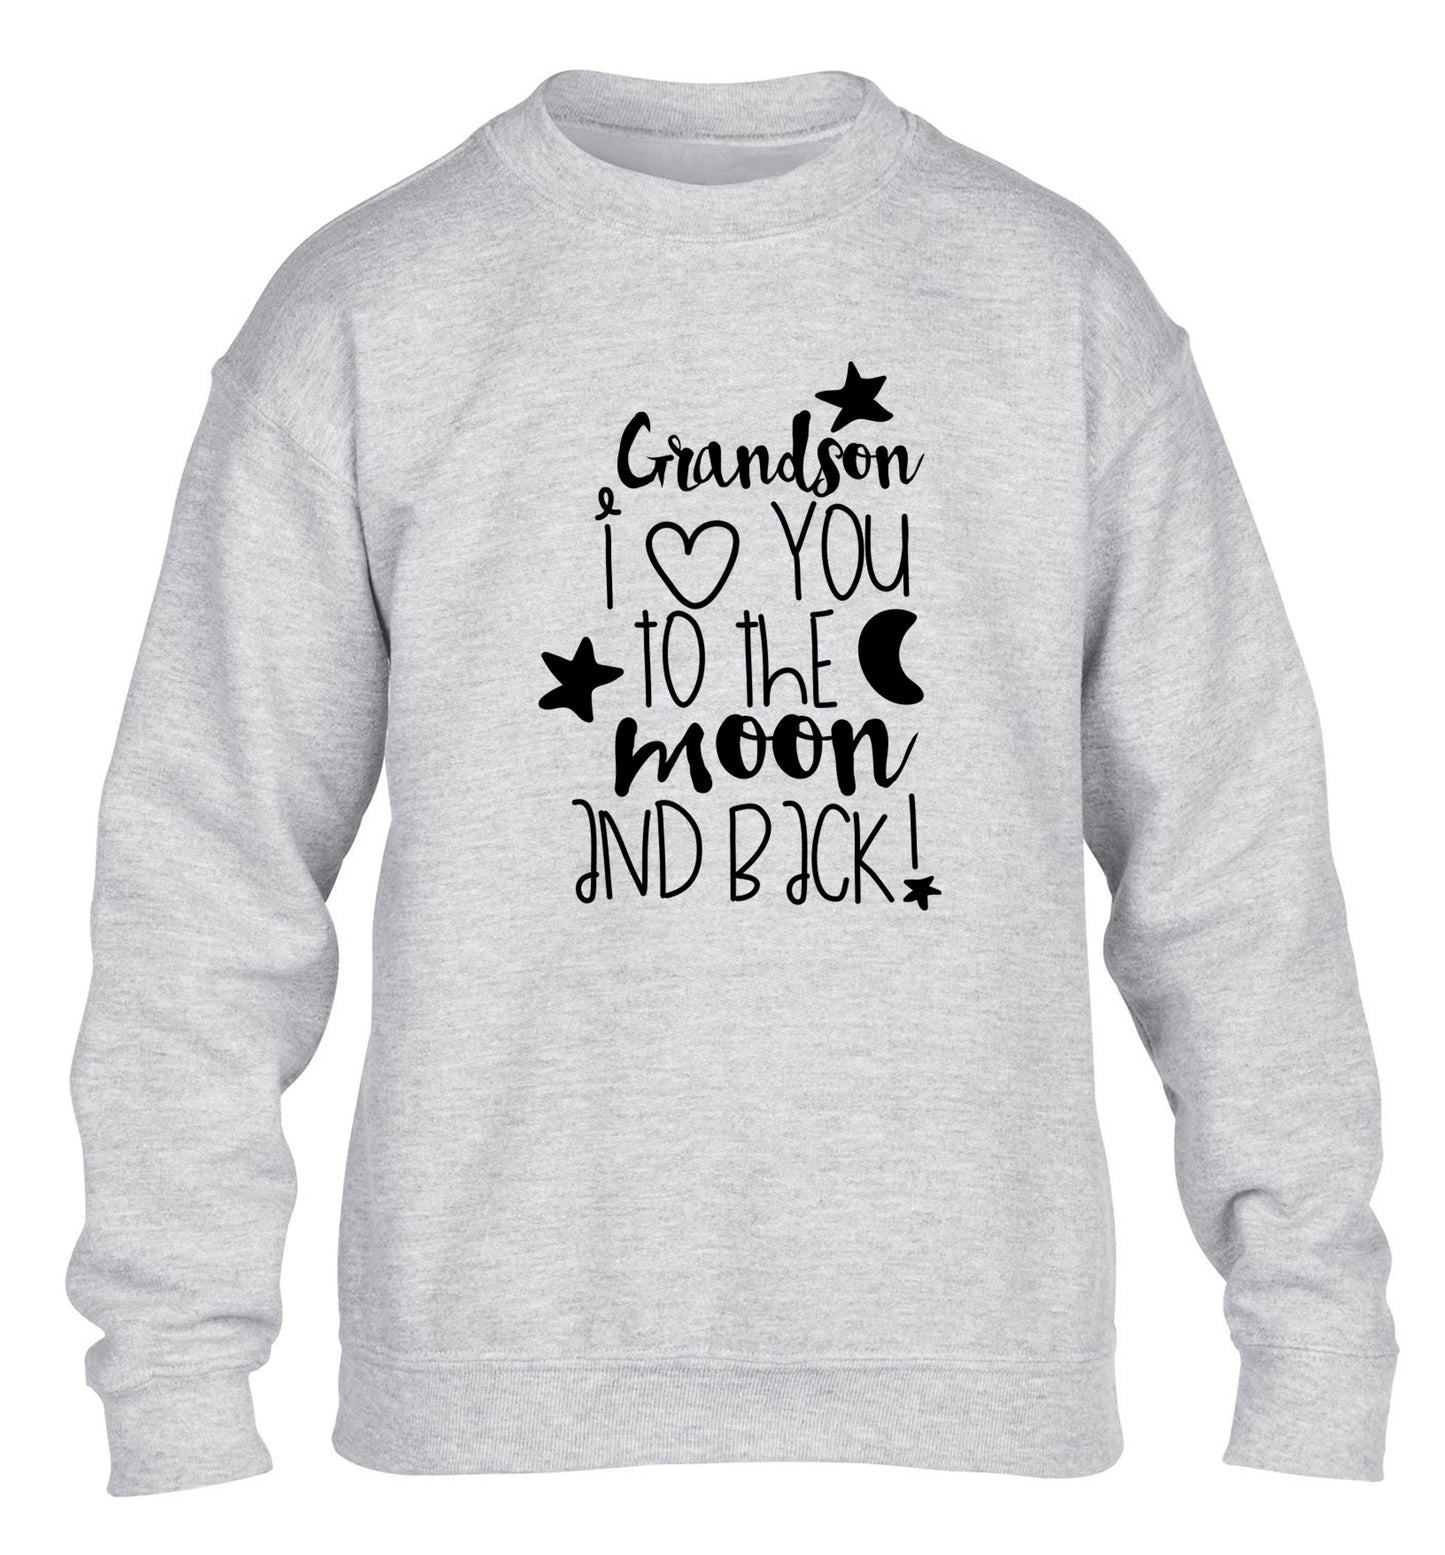 Grandson I love you to the moon and back children's grey  sweater 12-14 Years